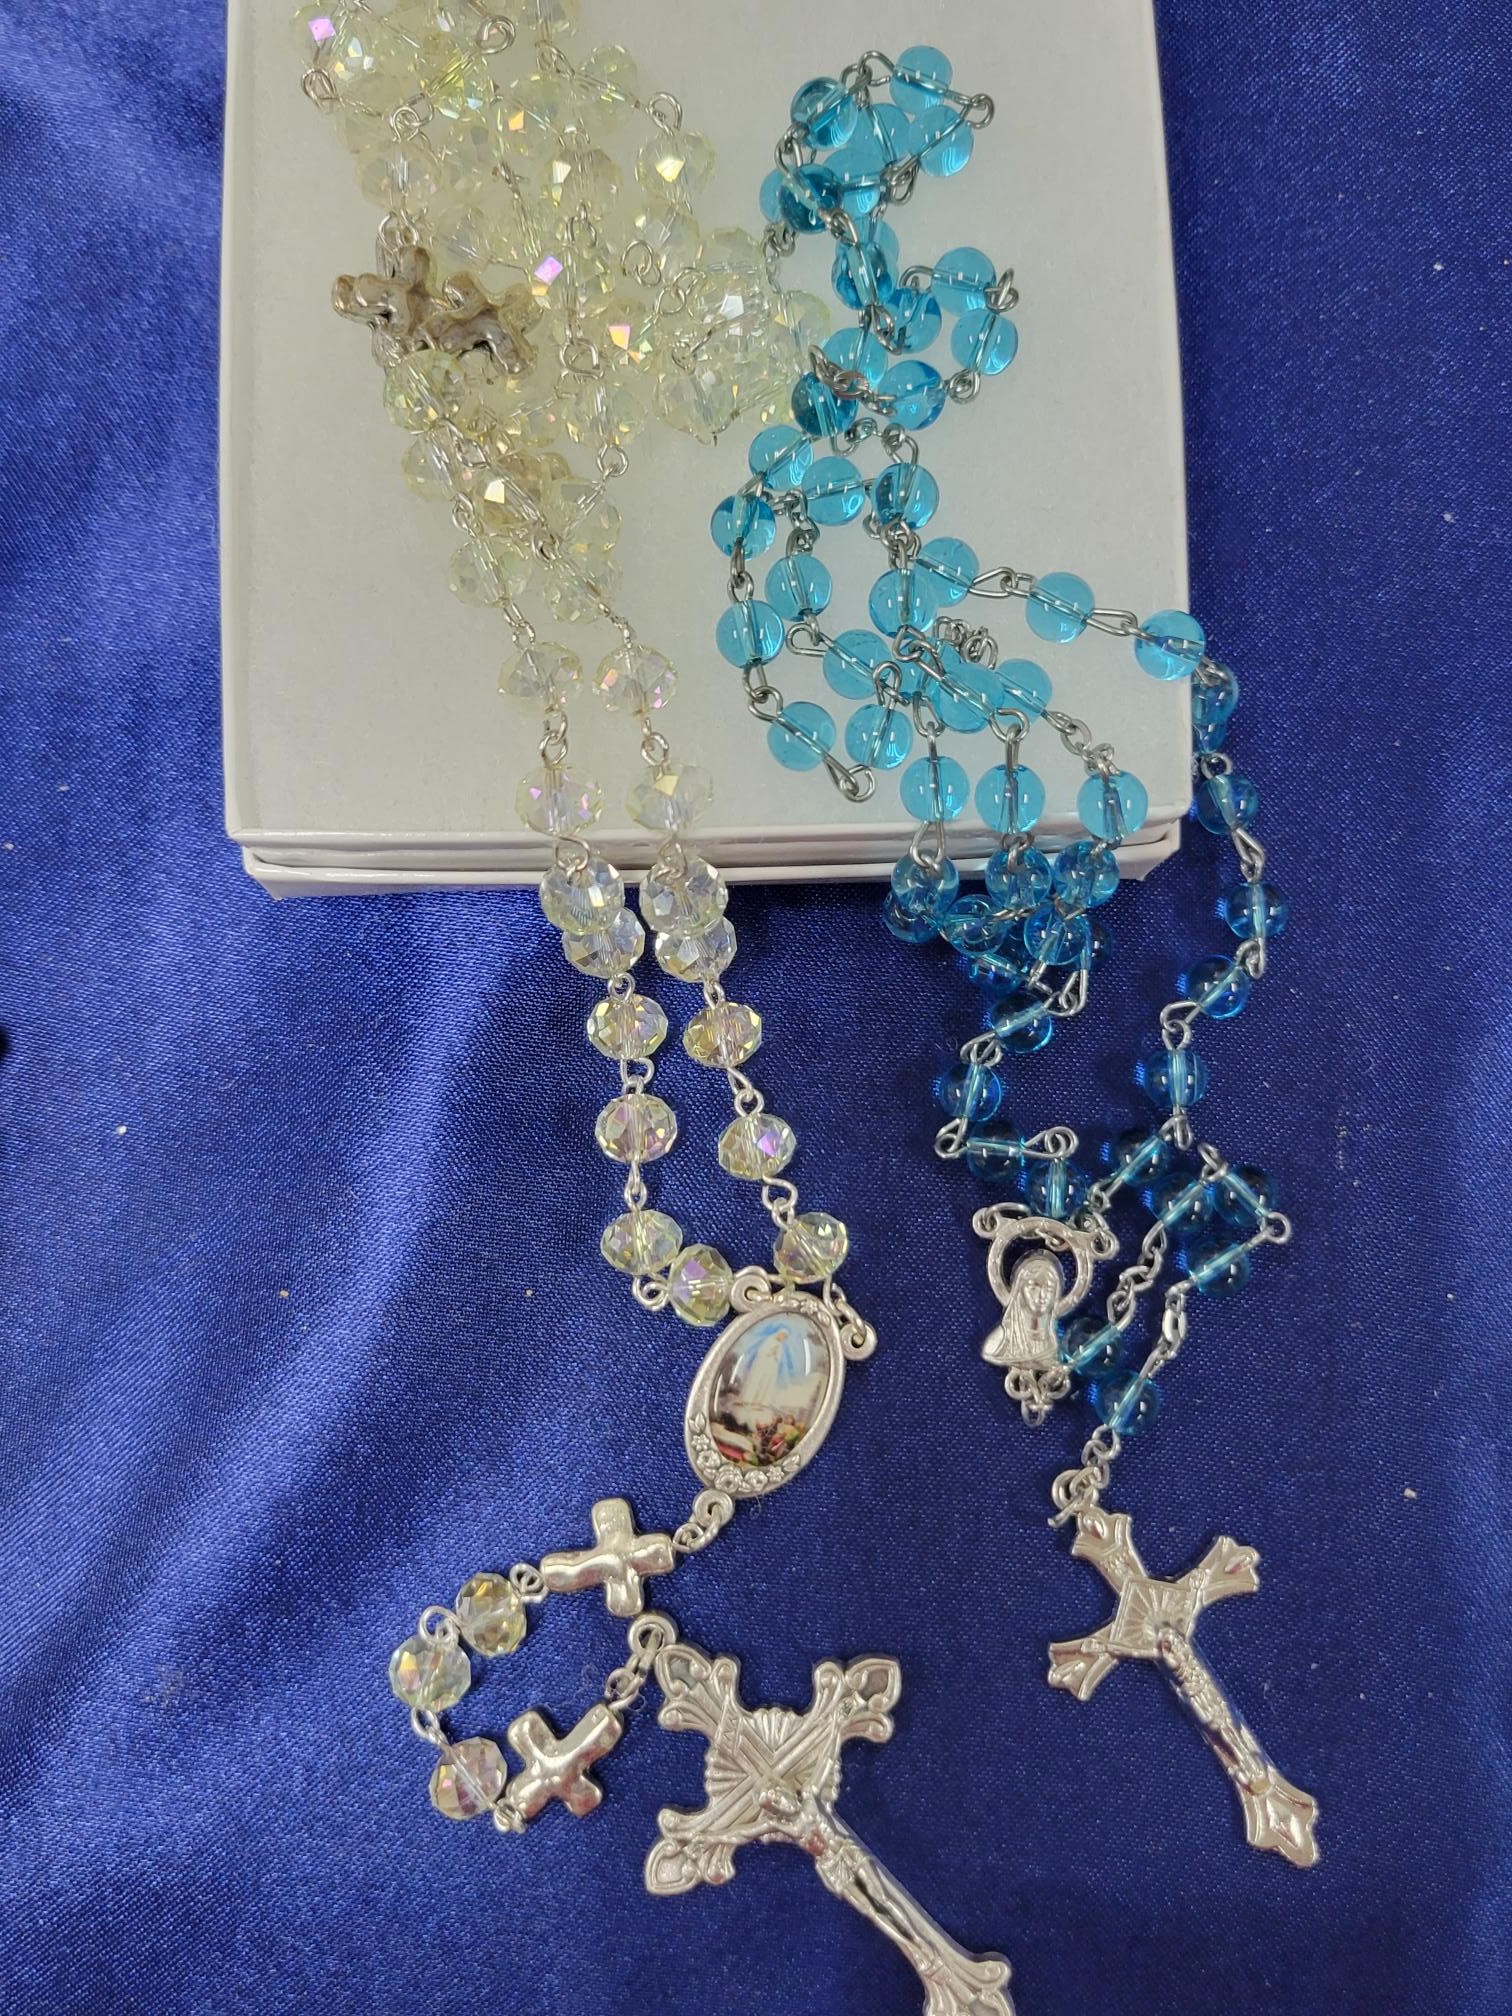 Two Roseries beside each other at the Church Store for St. Mary's Star of the Sea Holy Savior Catholic Church